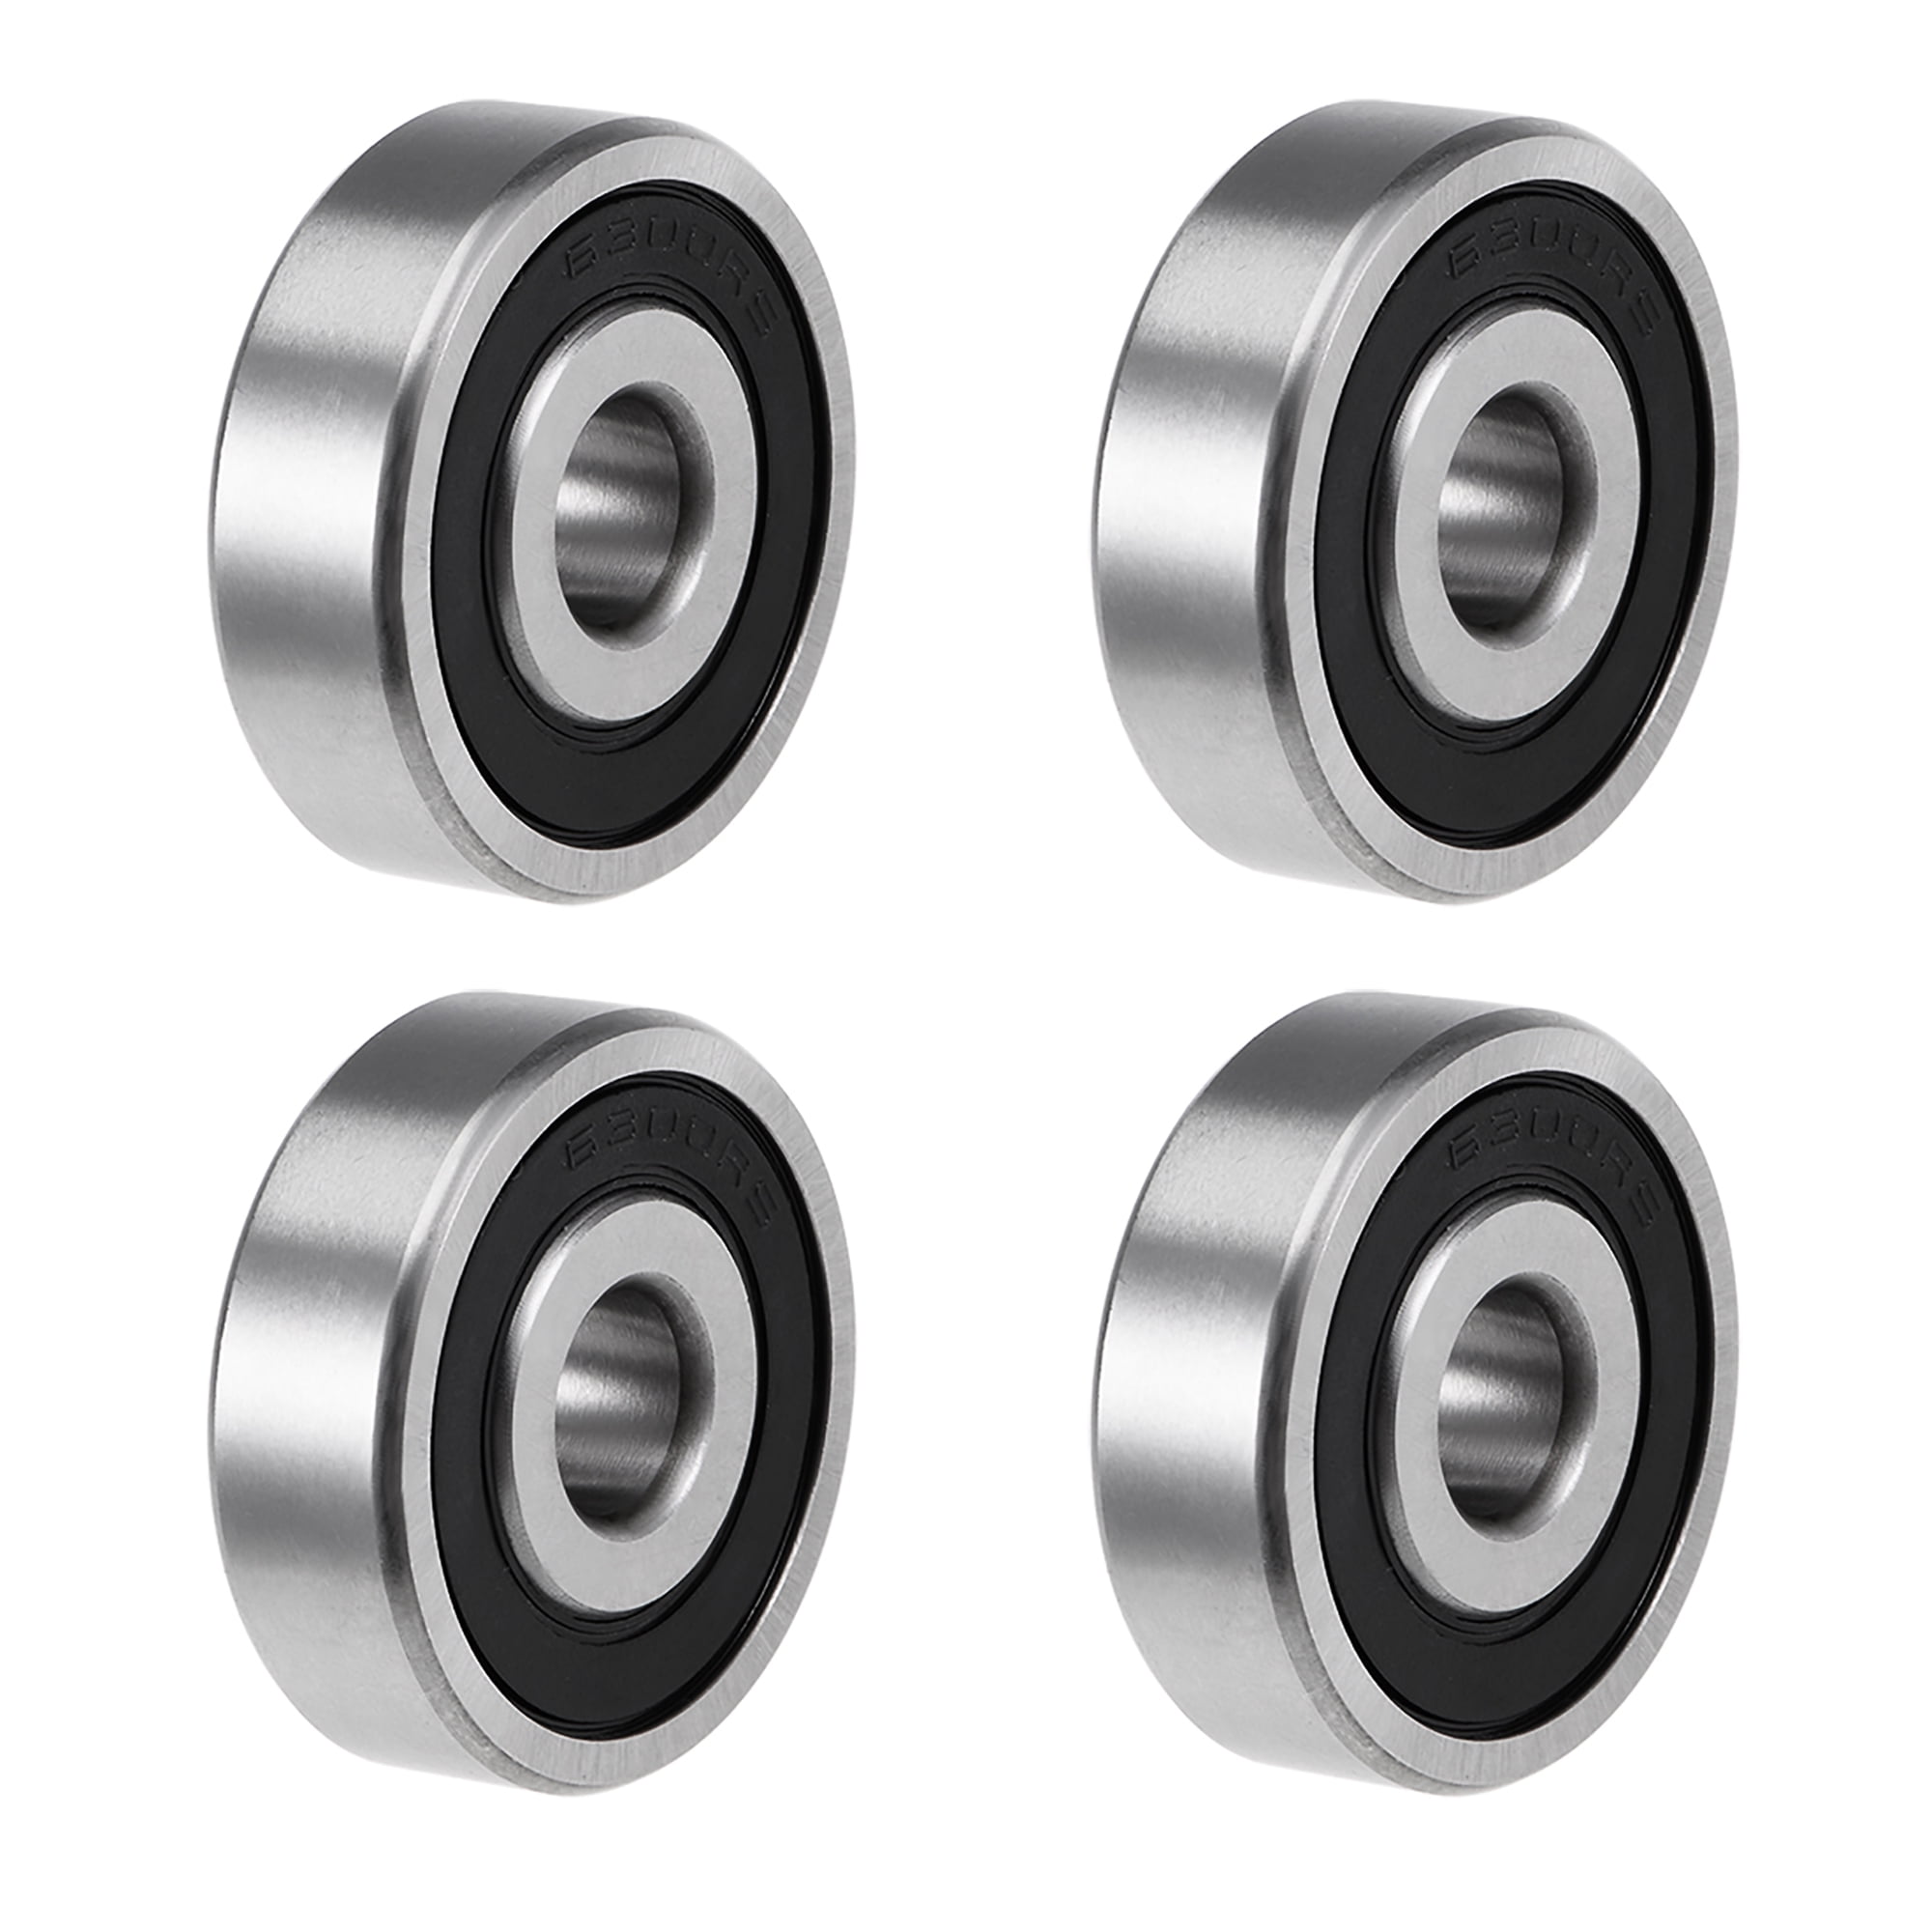 4pcs 6300-2RS 10mm x 35mm x 11mm Double Shielded Carbon Steel Deep Groove Ball Bearings Z2